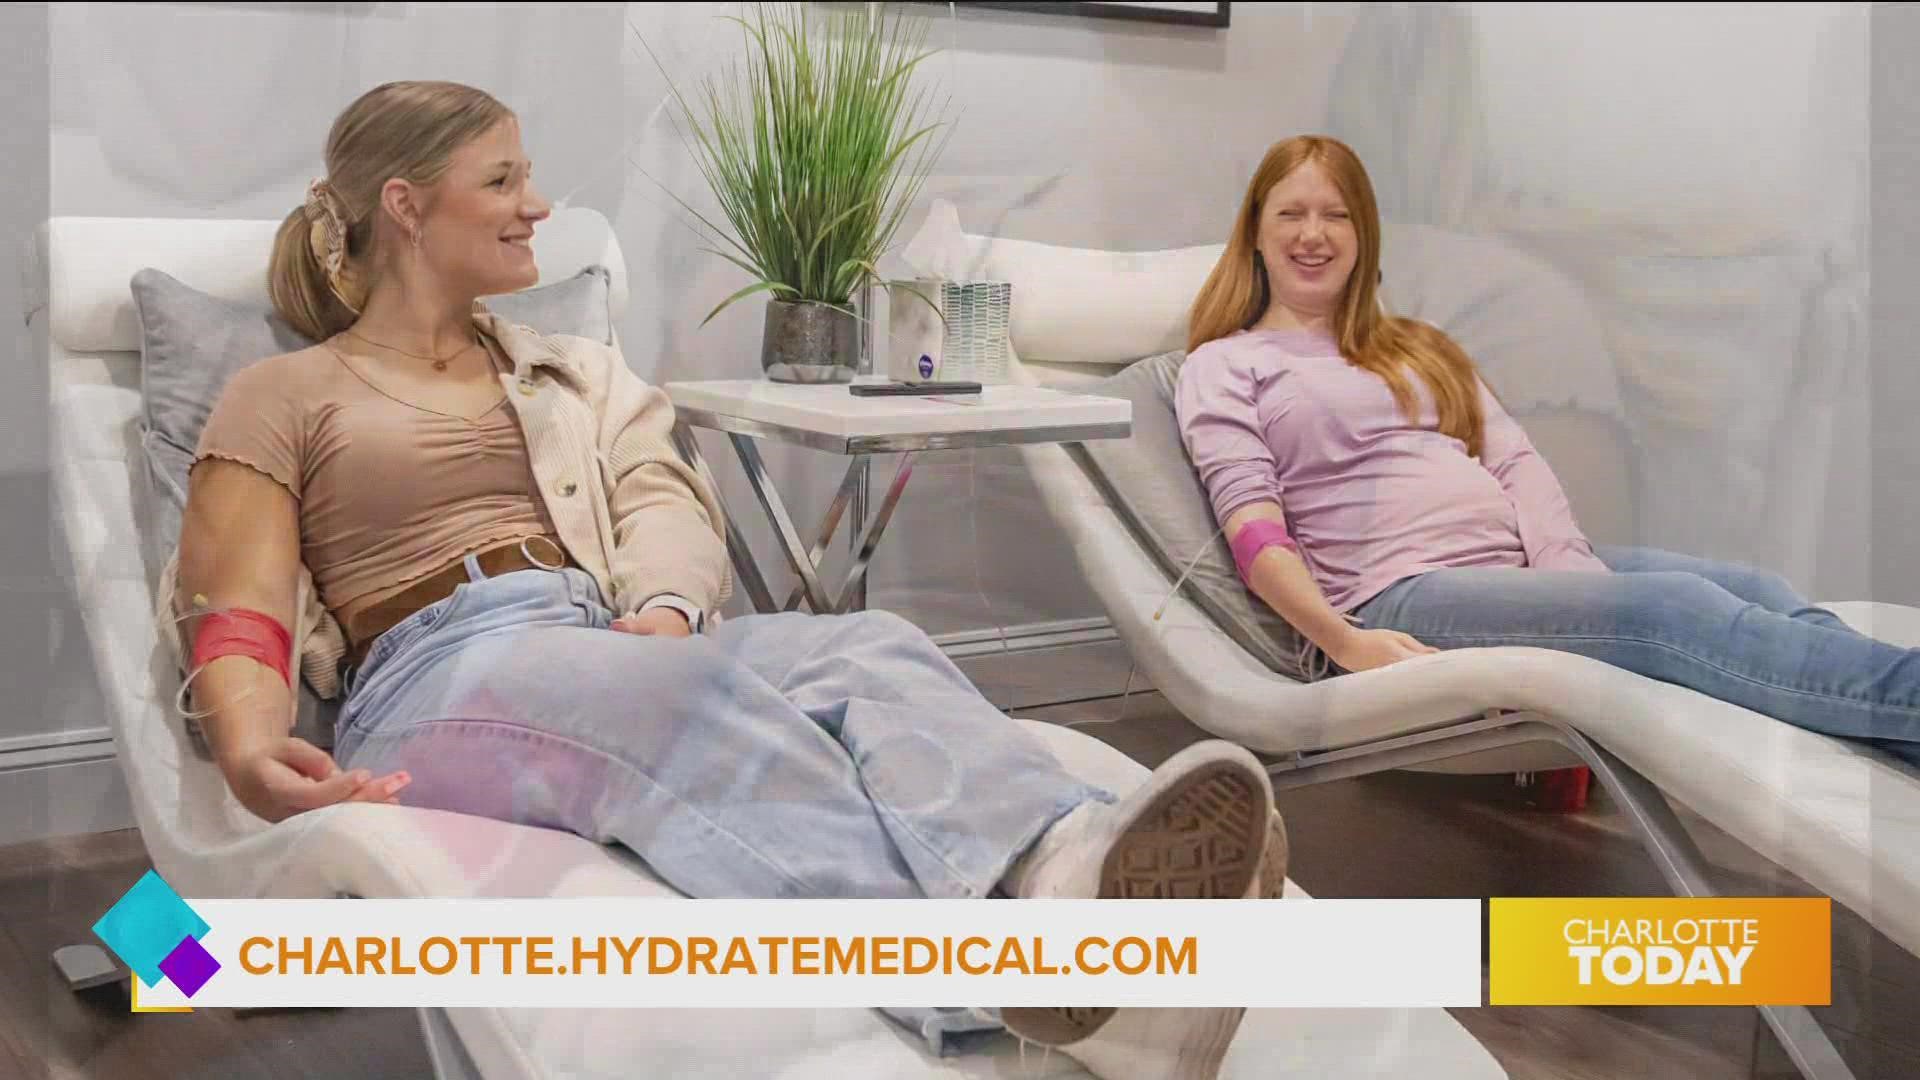 Hydrate Medical offers B12 shots as well as many other wellness treatments